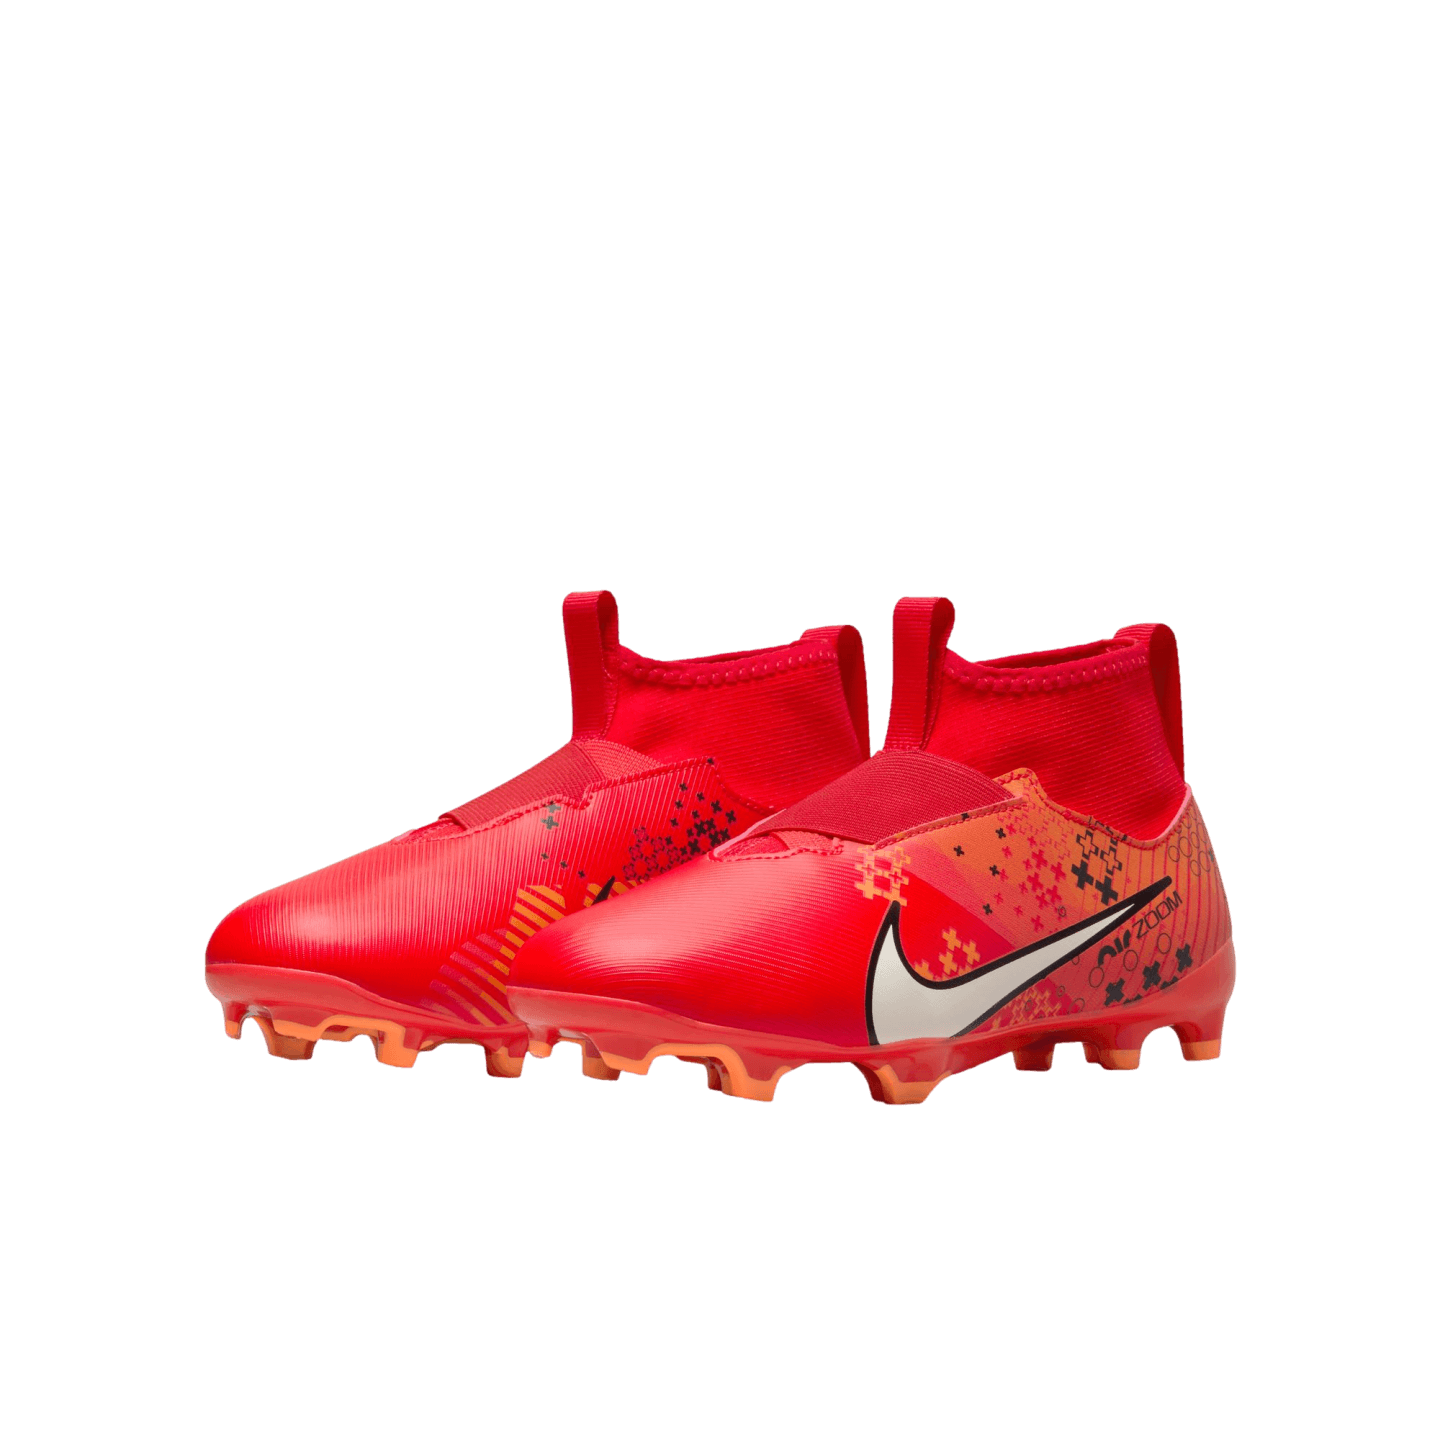 Nike Zoom Superfly Academy MDS Youth Firm Ground Cleats